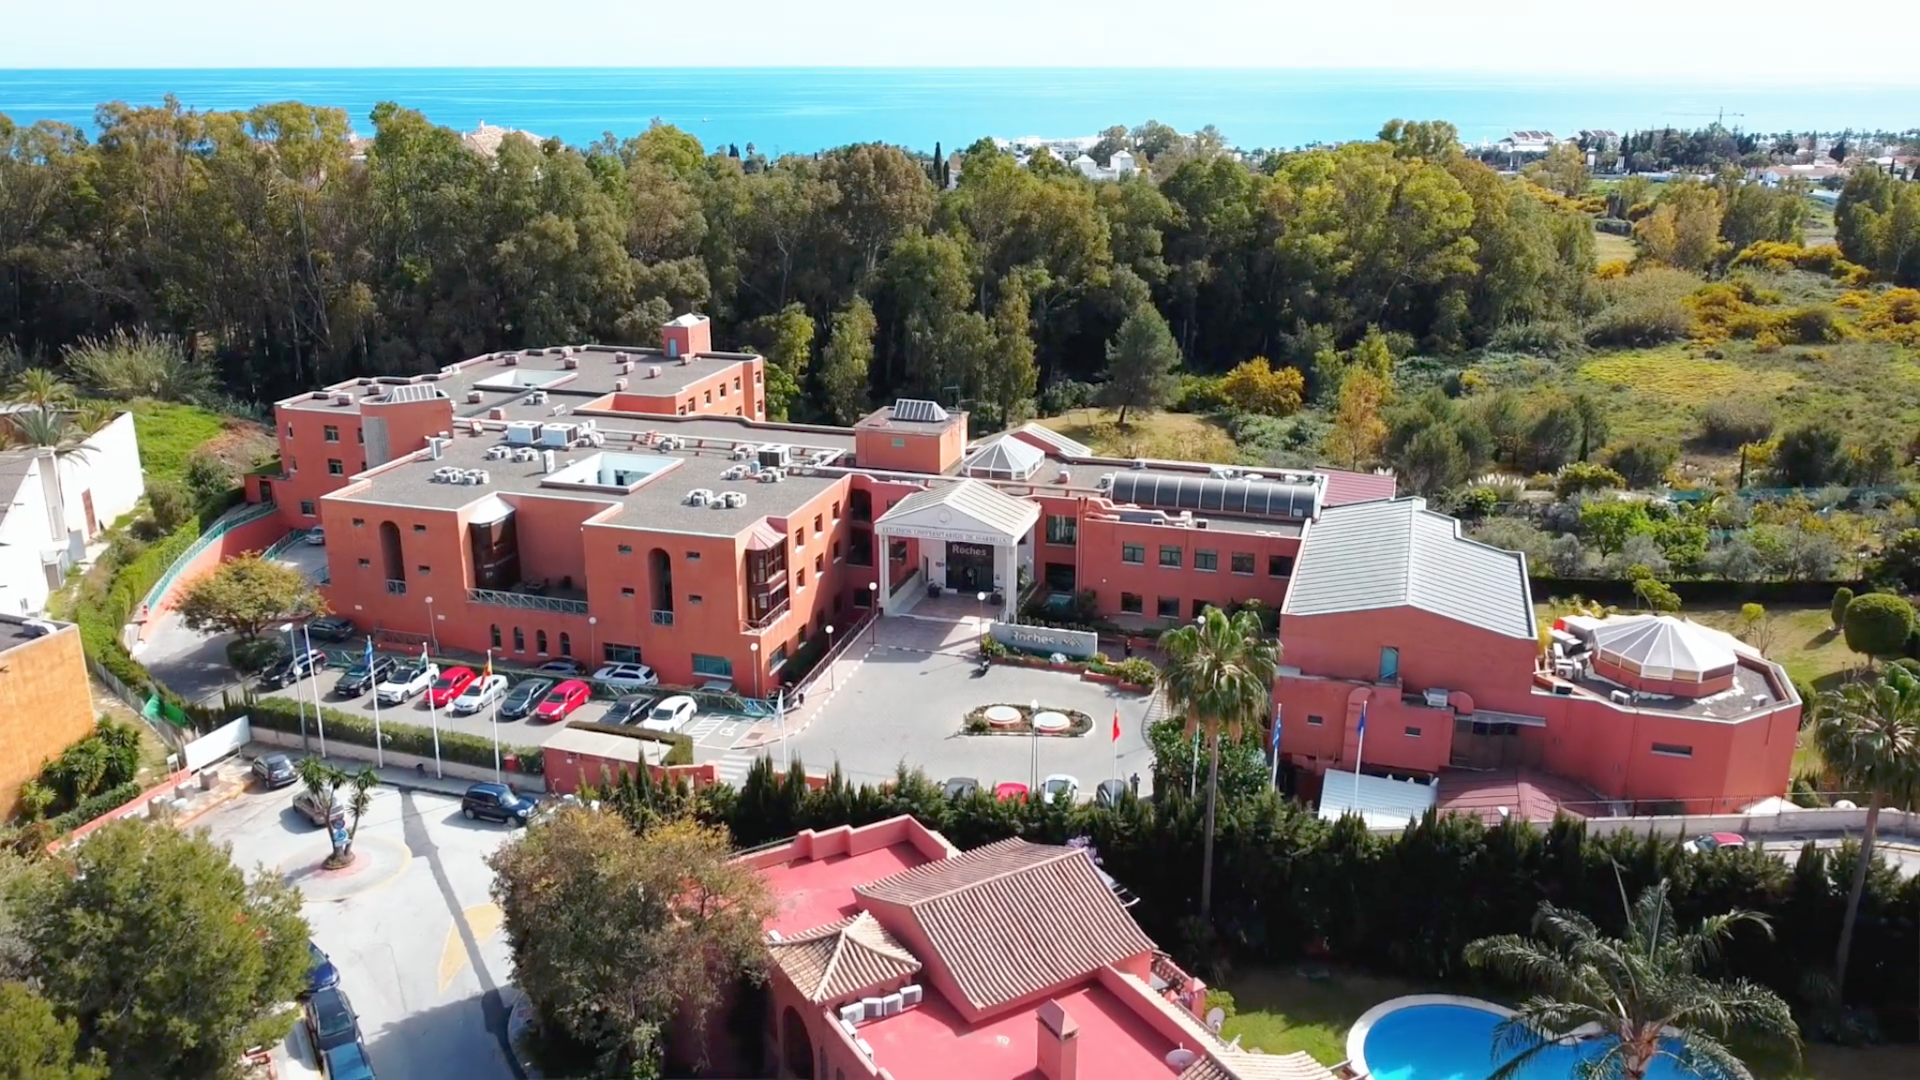 Les Roches Marbella: Behind the scenes of top hospitality university of the world